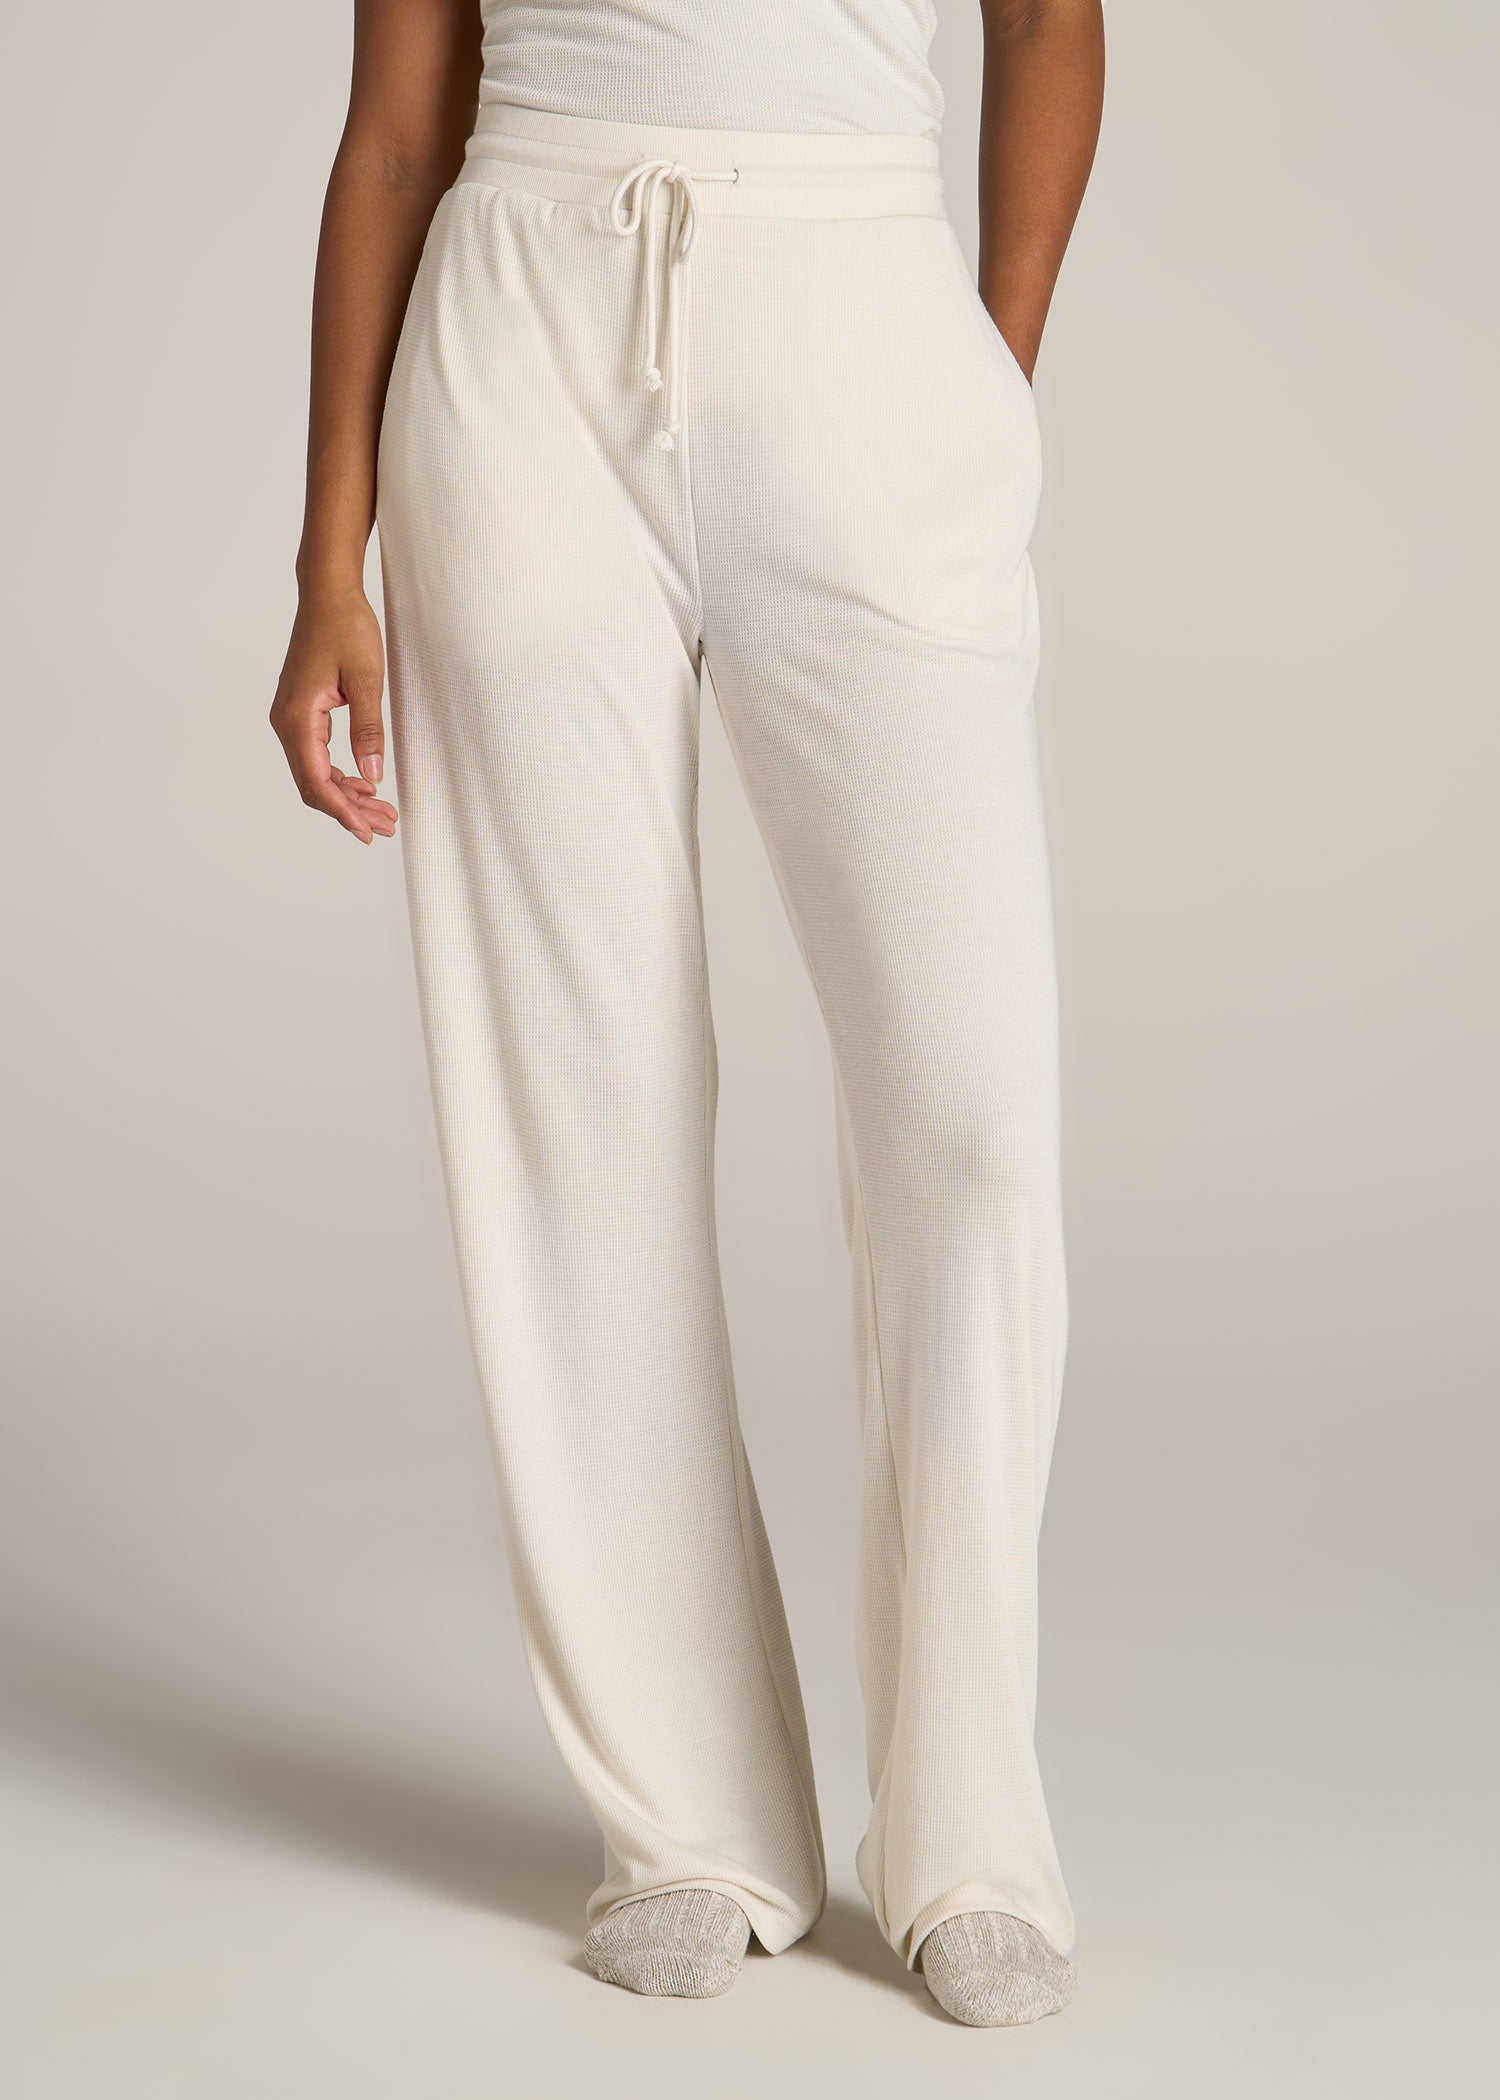 Open-Bottom Waffle Lounge Pants for Tall Women in White Alyssum